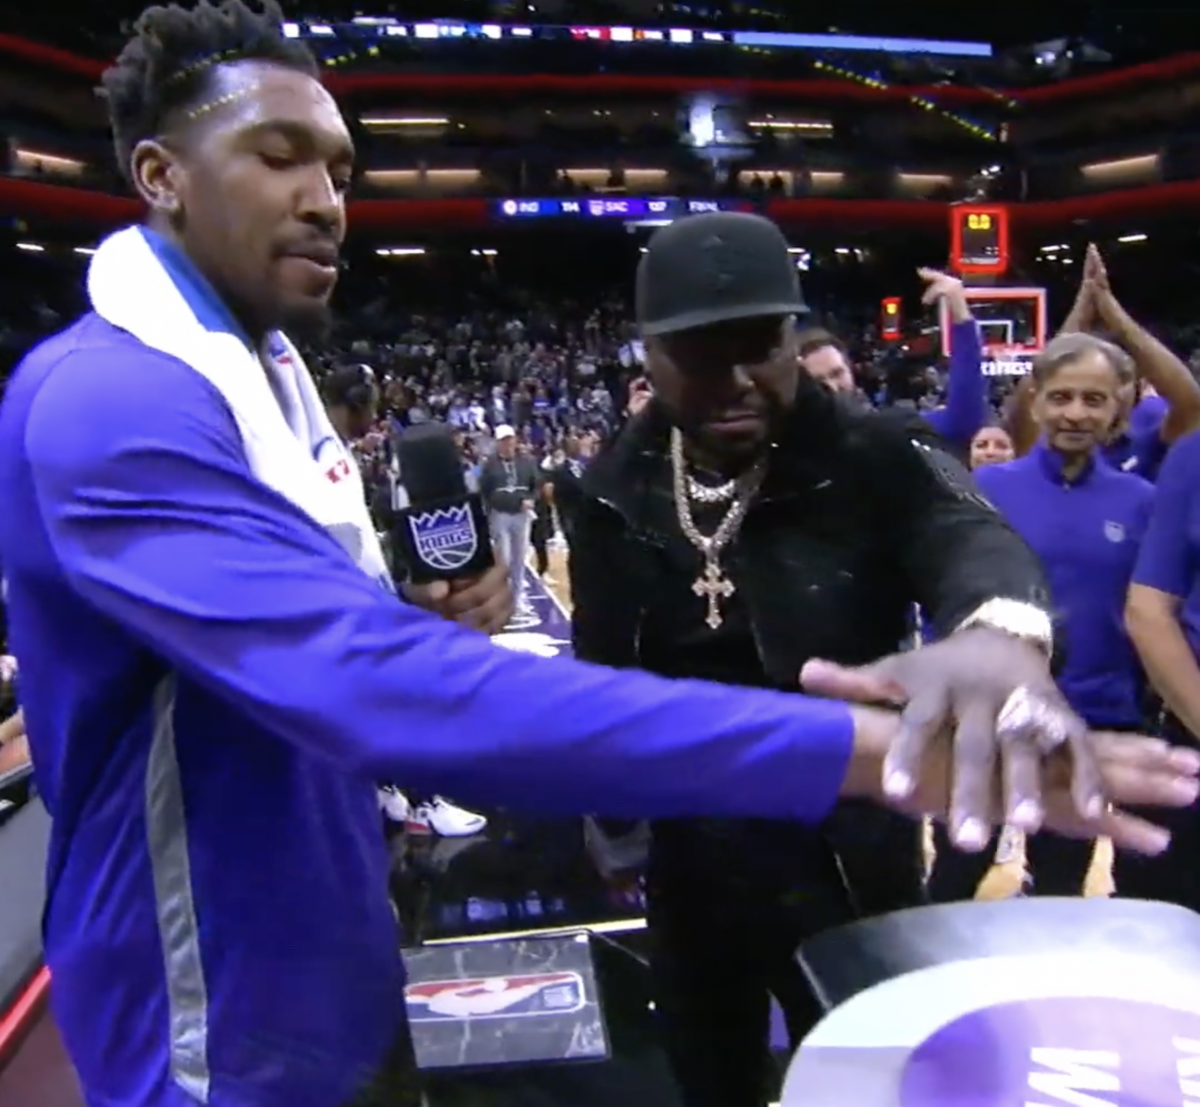 50 Cent lit the beam for the Kings, who are the NBA’s most delightful surprise so far this season